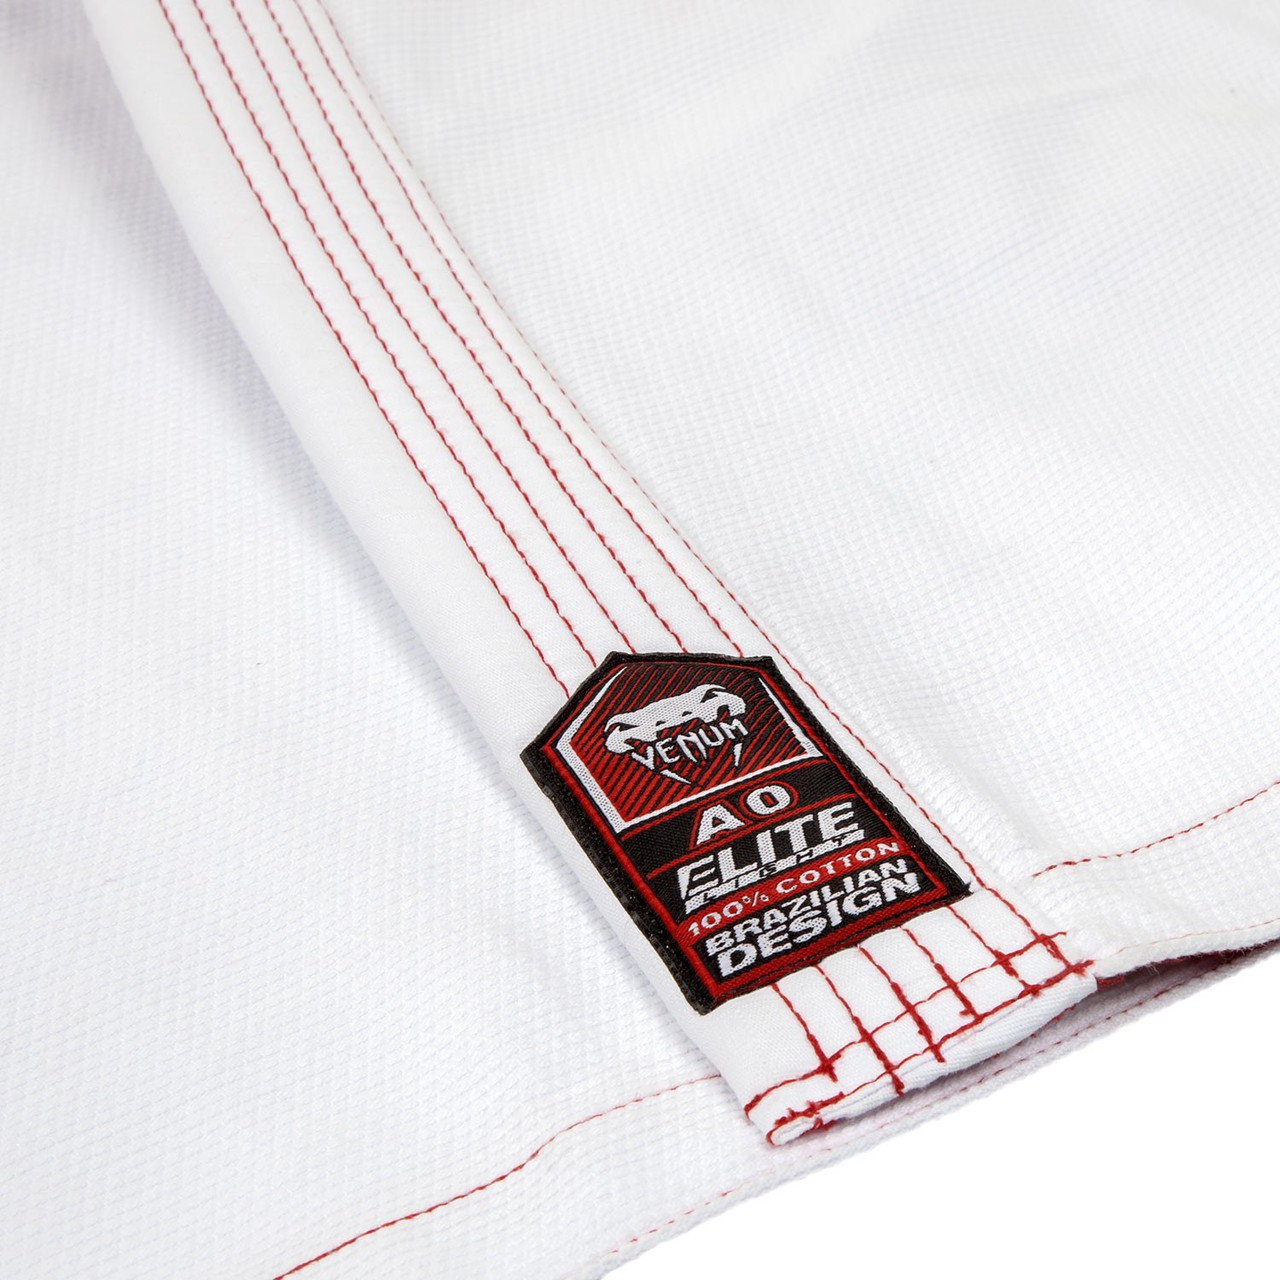 Lapel tip woven patch Venum Elite Light BJJ GI in White is now available at www.thejiujitsushop.com

Enjoy Free Shipping from The Jiu Jitsu Shop today! 